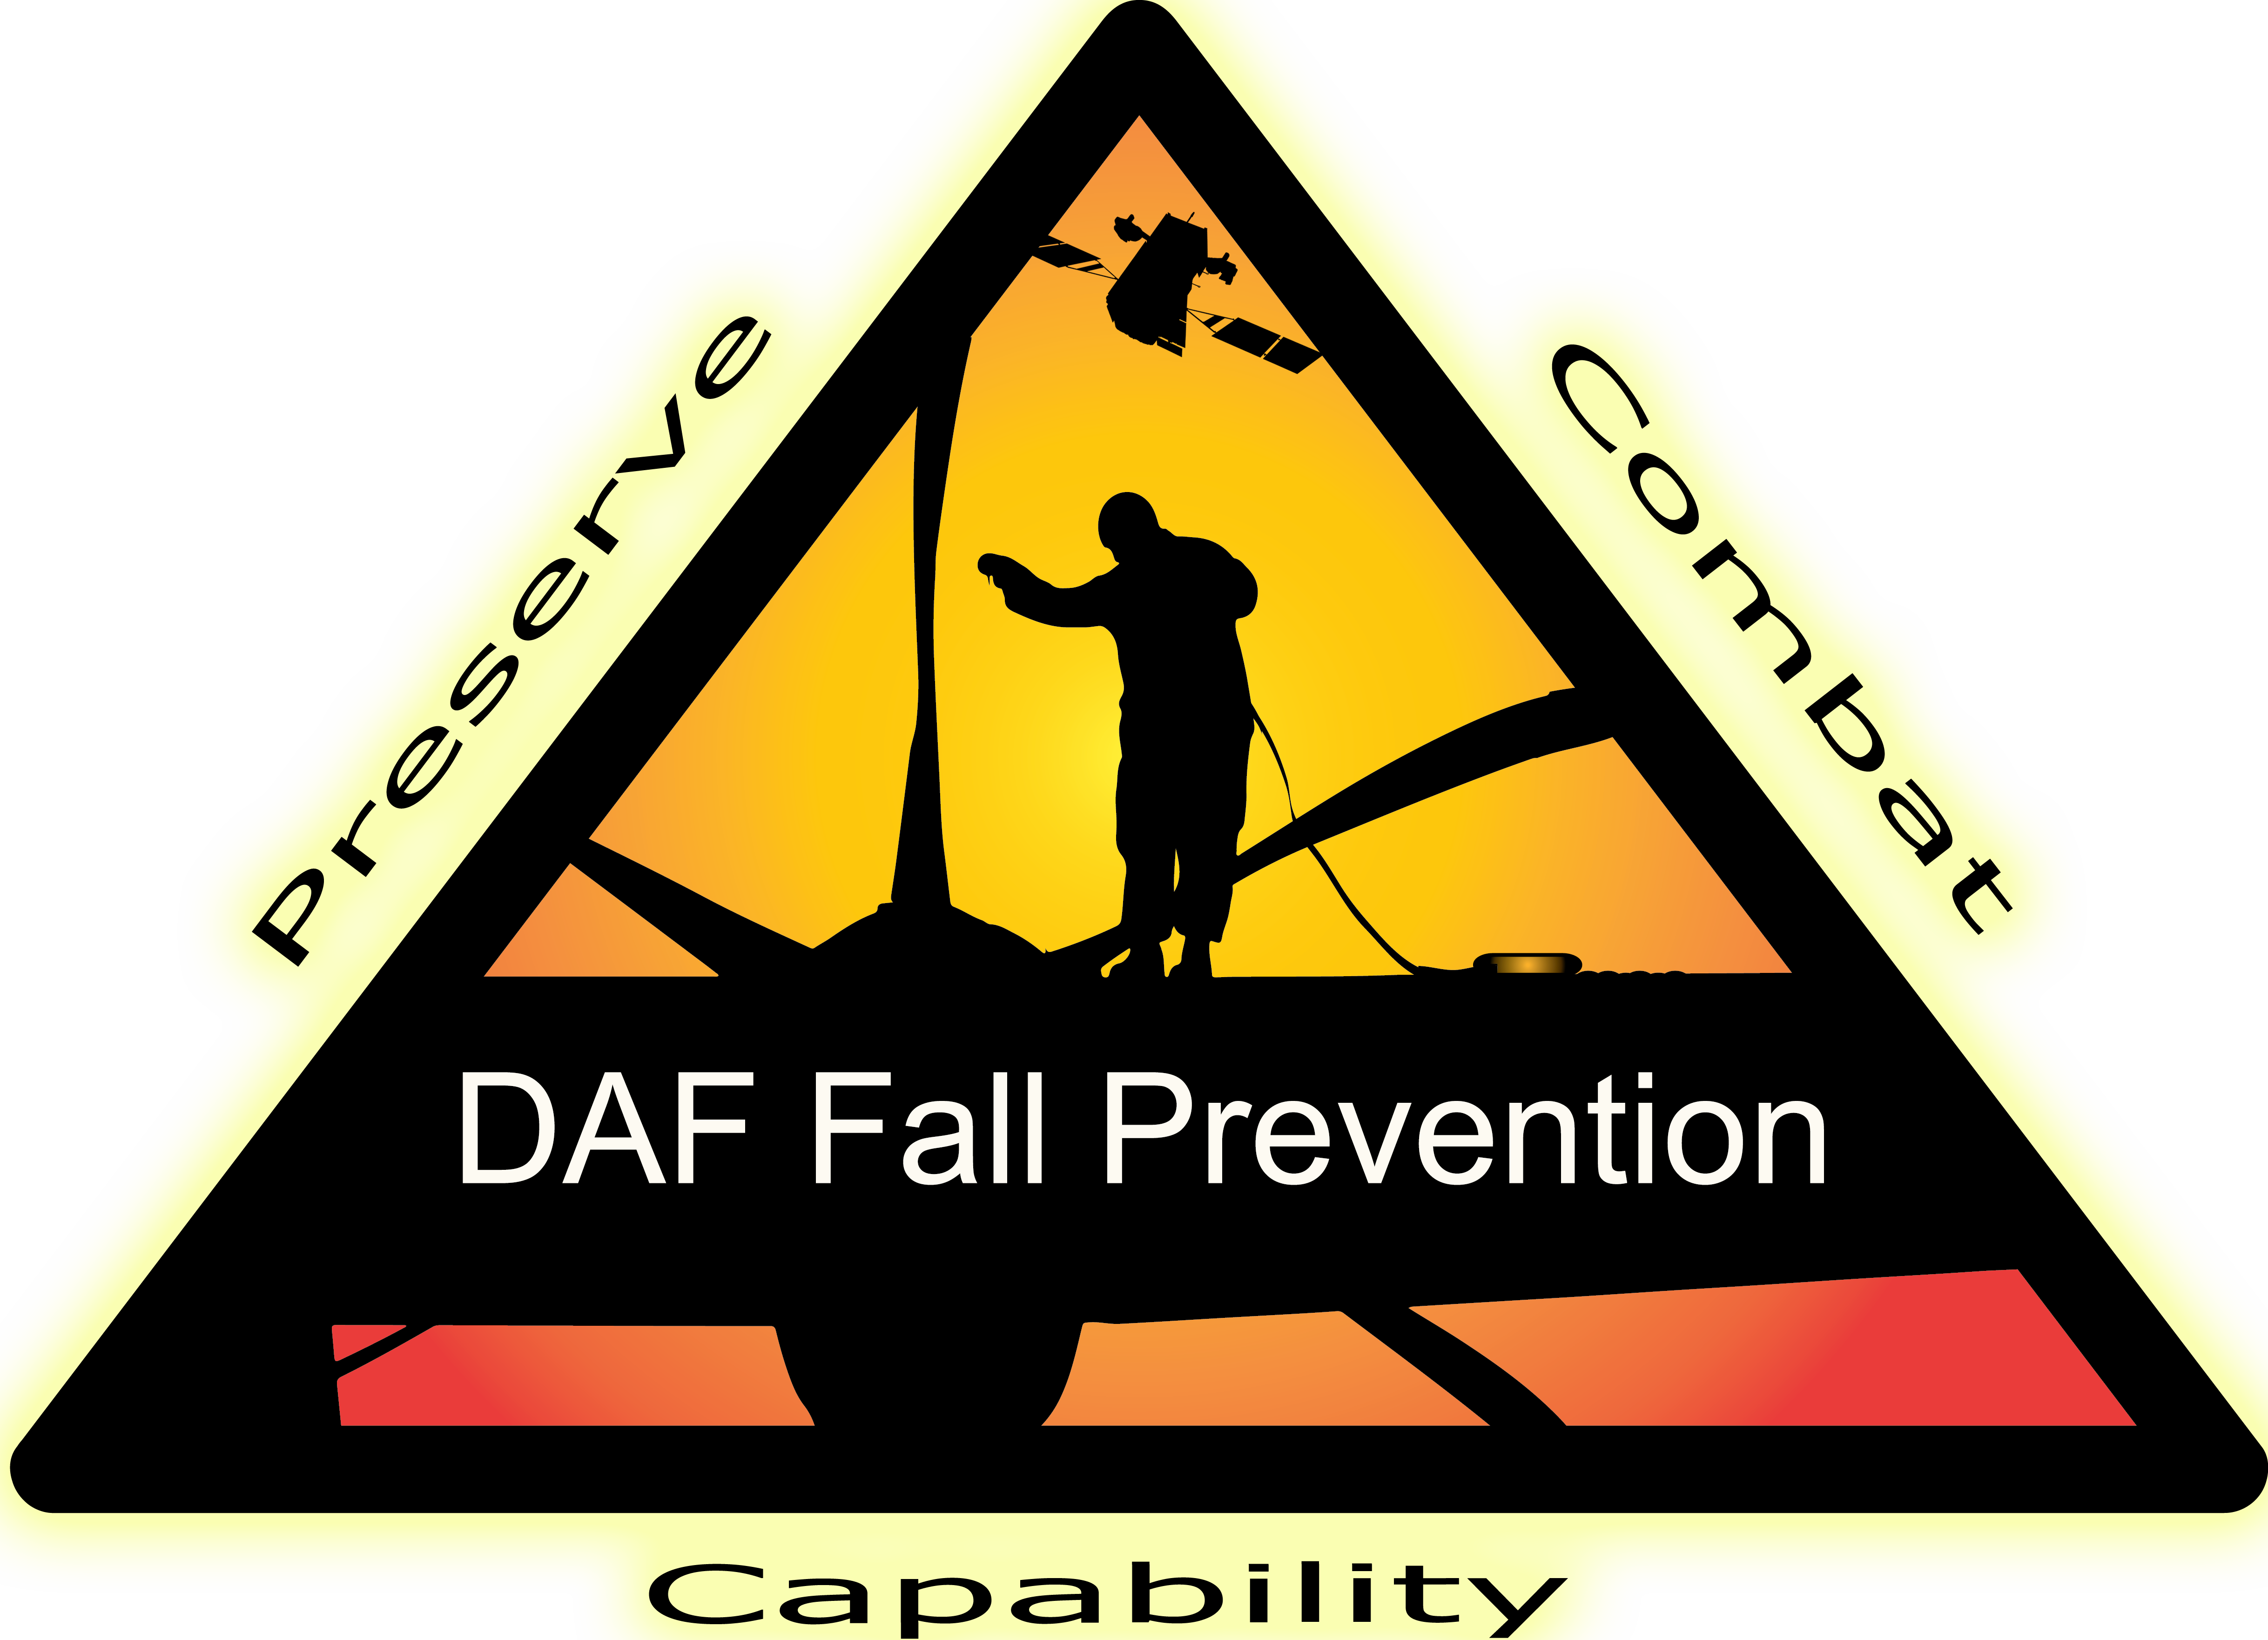 Department of the Air Force Fall Prevention Triangle